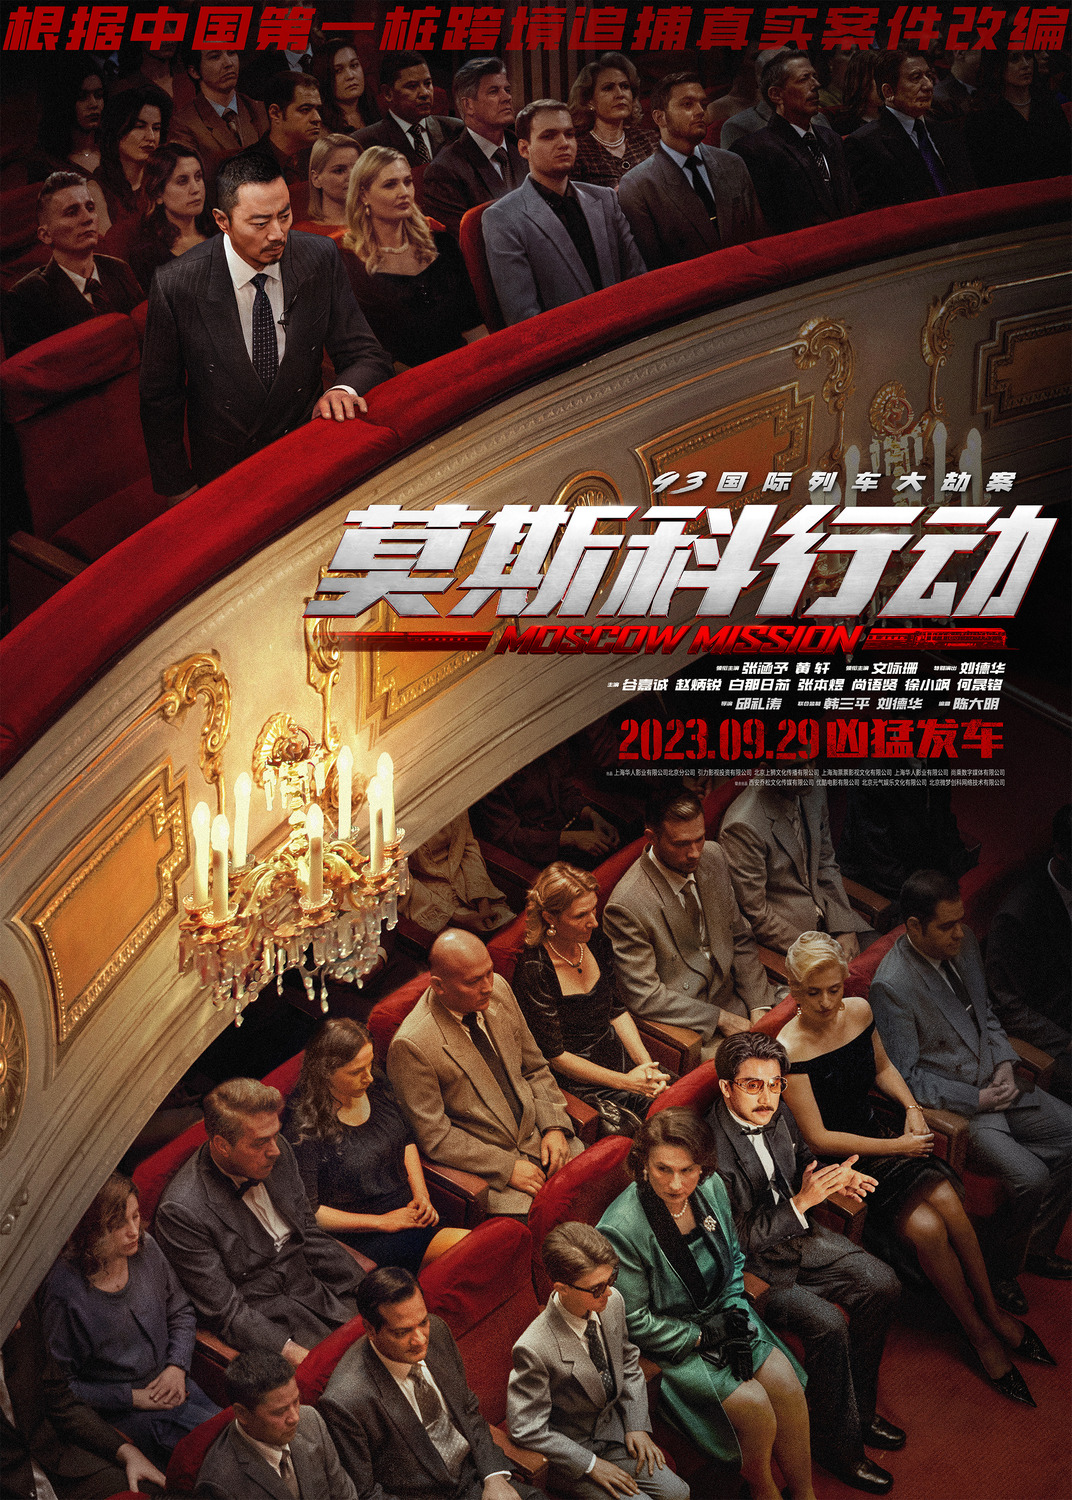 Extra Large Movie Poster Image for Mosike xingdong (#8 of 8)